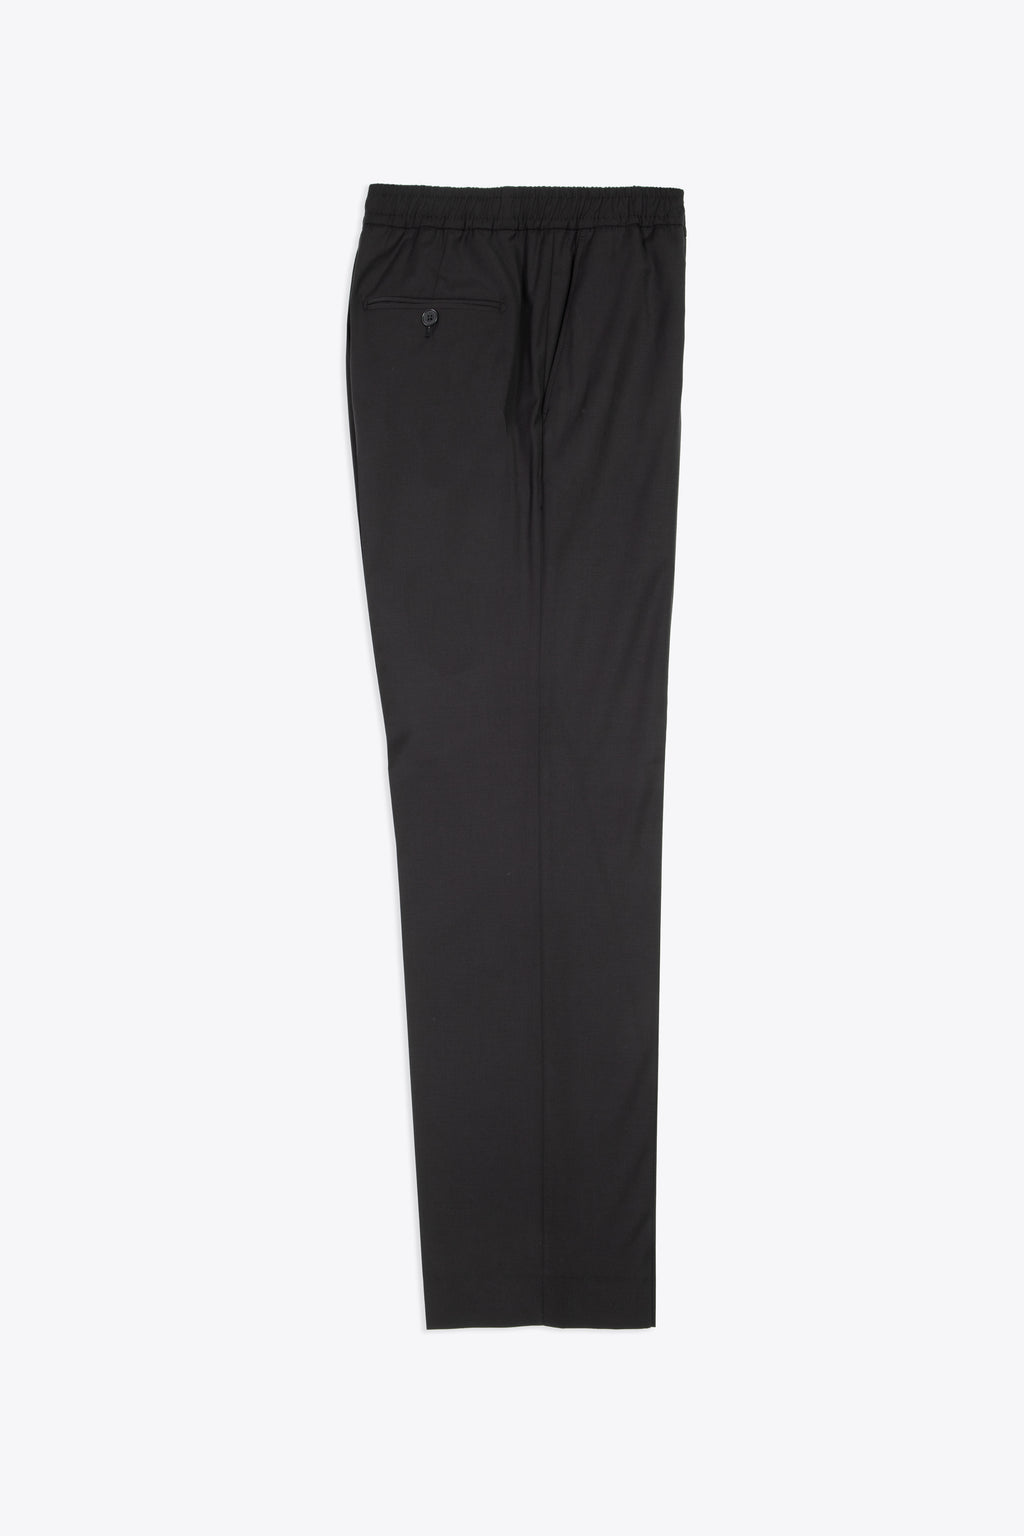 alt-image__Black-cotton-relaxed-pant-with-elastic-waistband